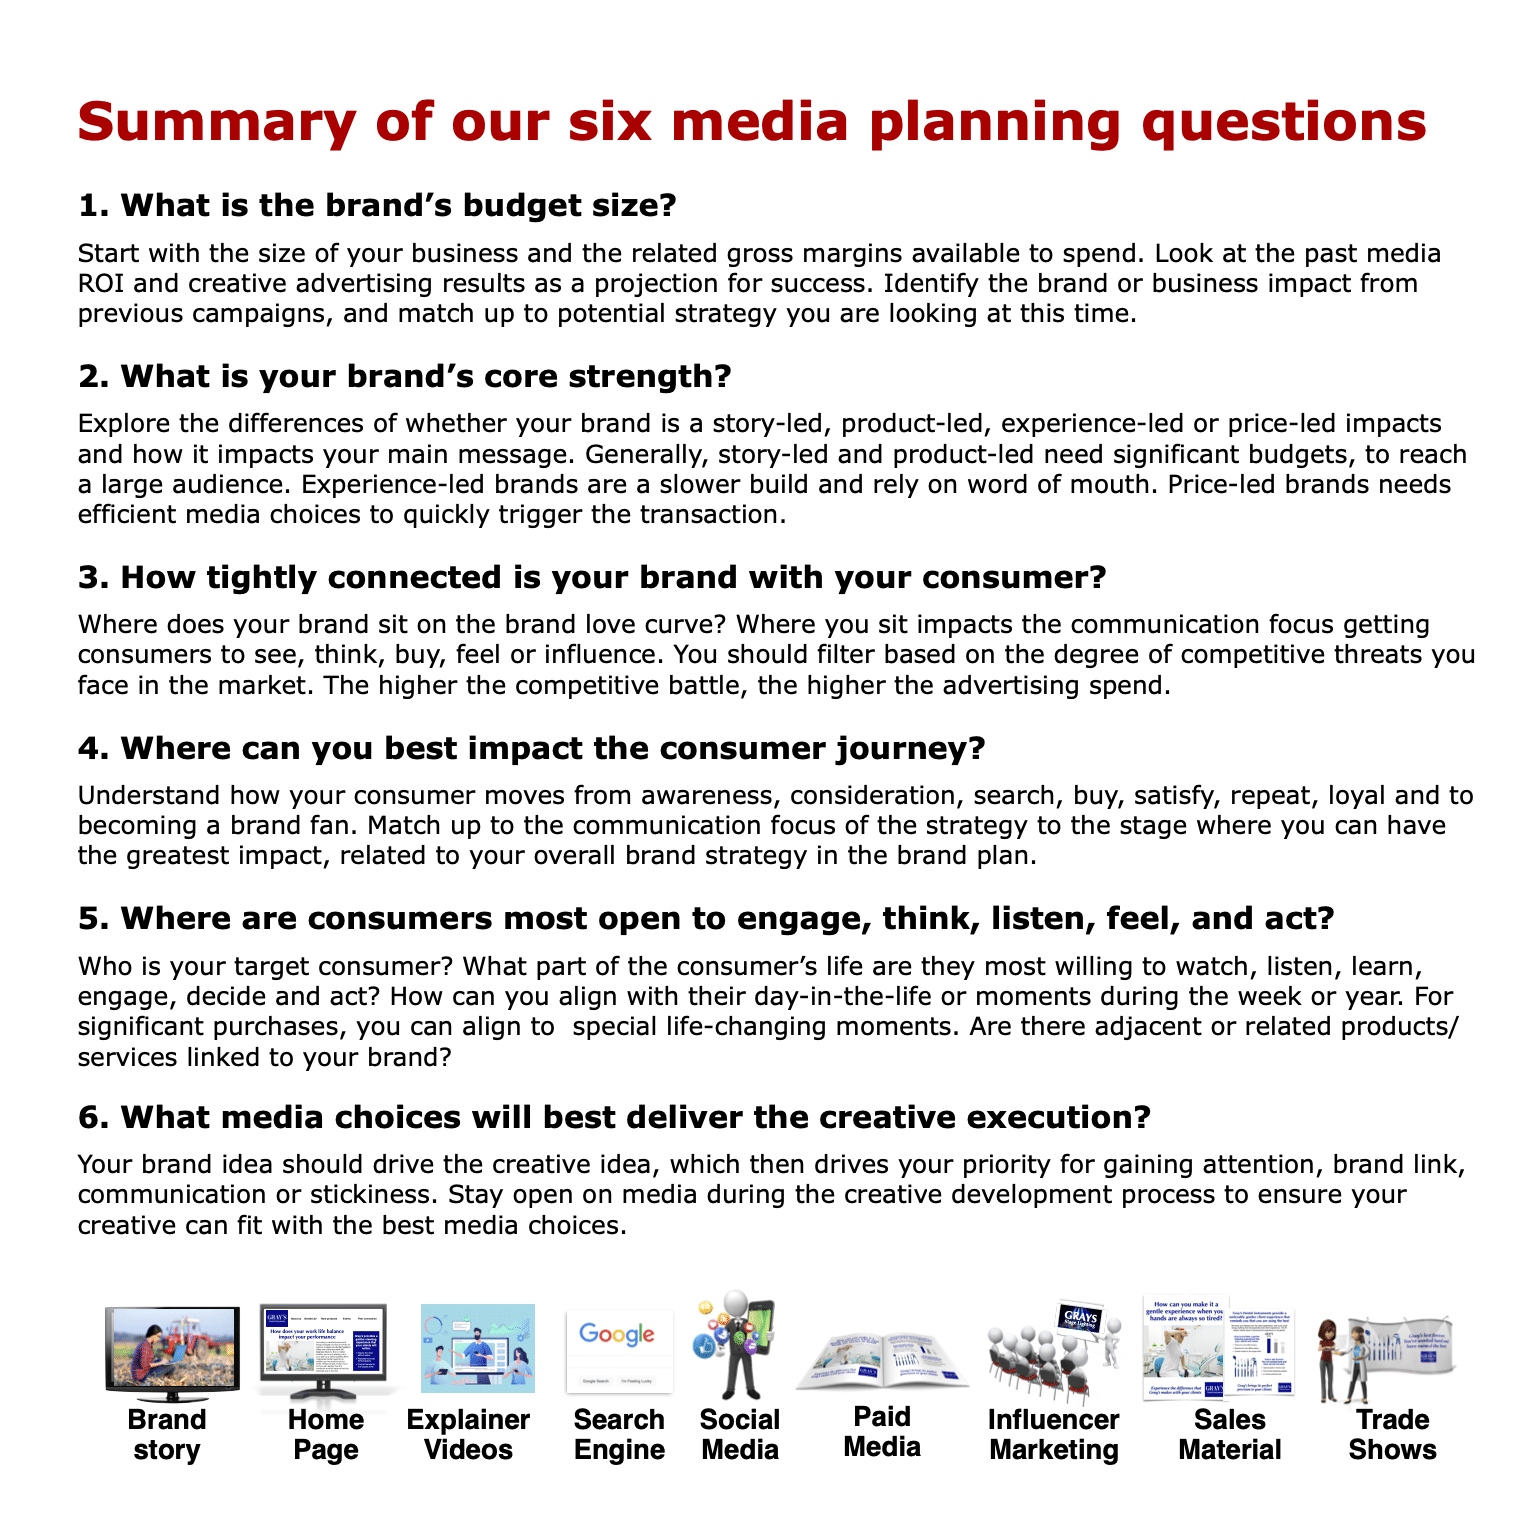 Media decisions for your Media Planning